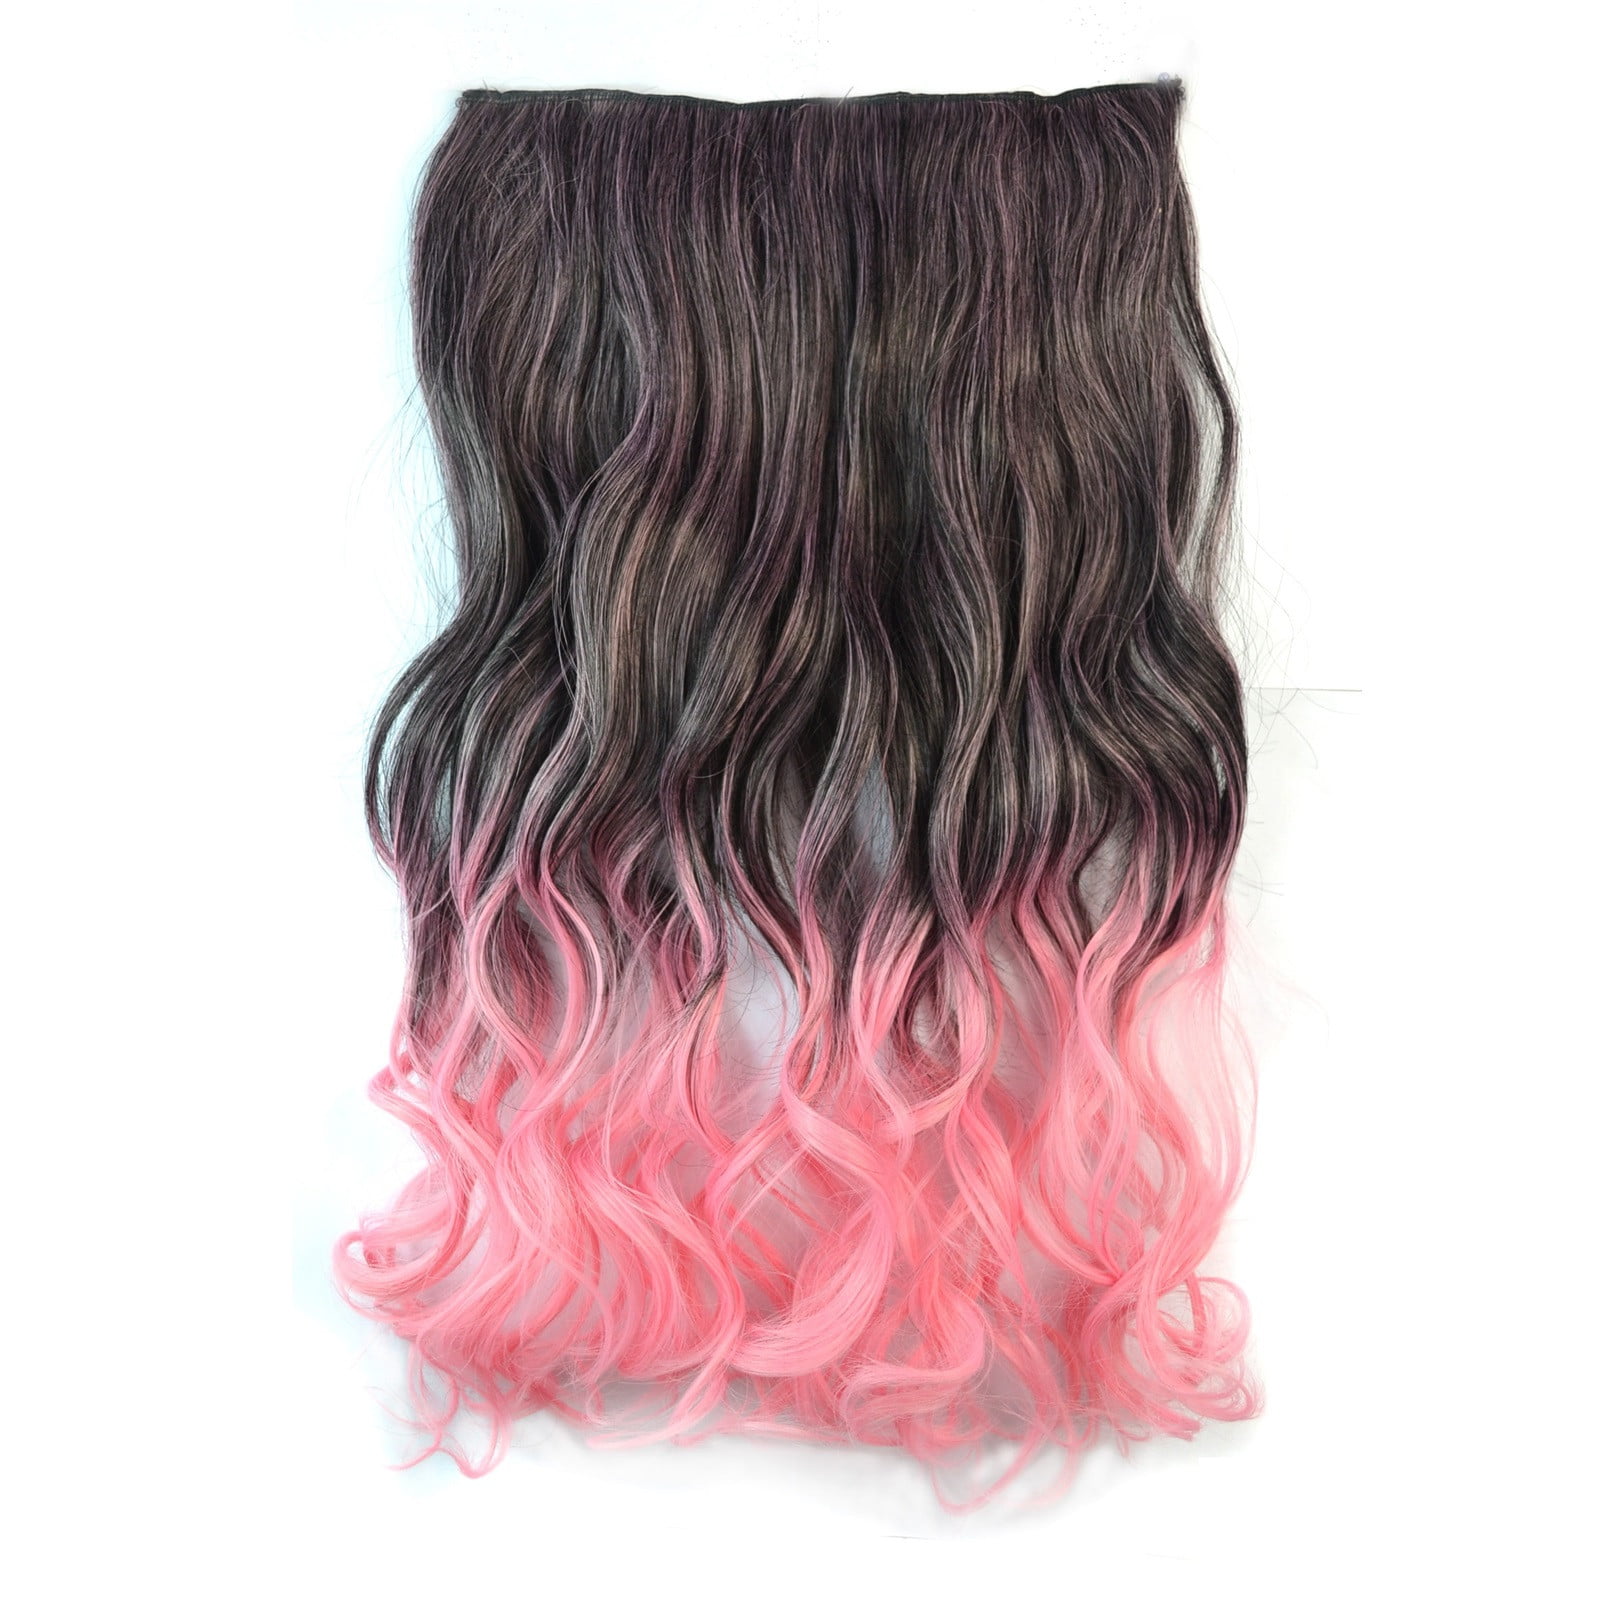 Juebong Human Hair Wigs Clip Hair Wig Female Hair Extension Piece Color  Gradient Five Clip Wig Piece Big Wave Long Curly Hair 